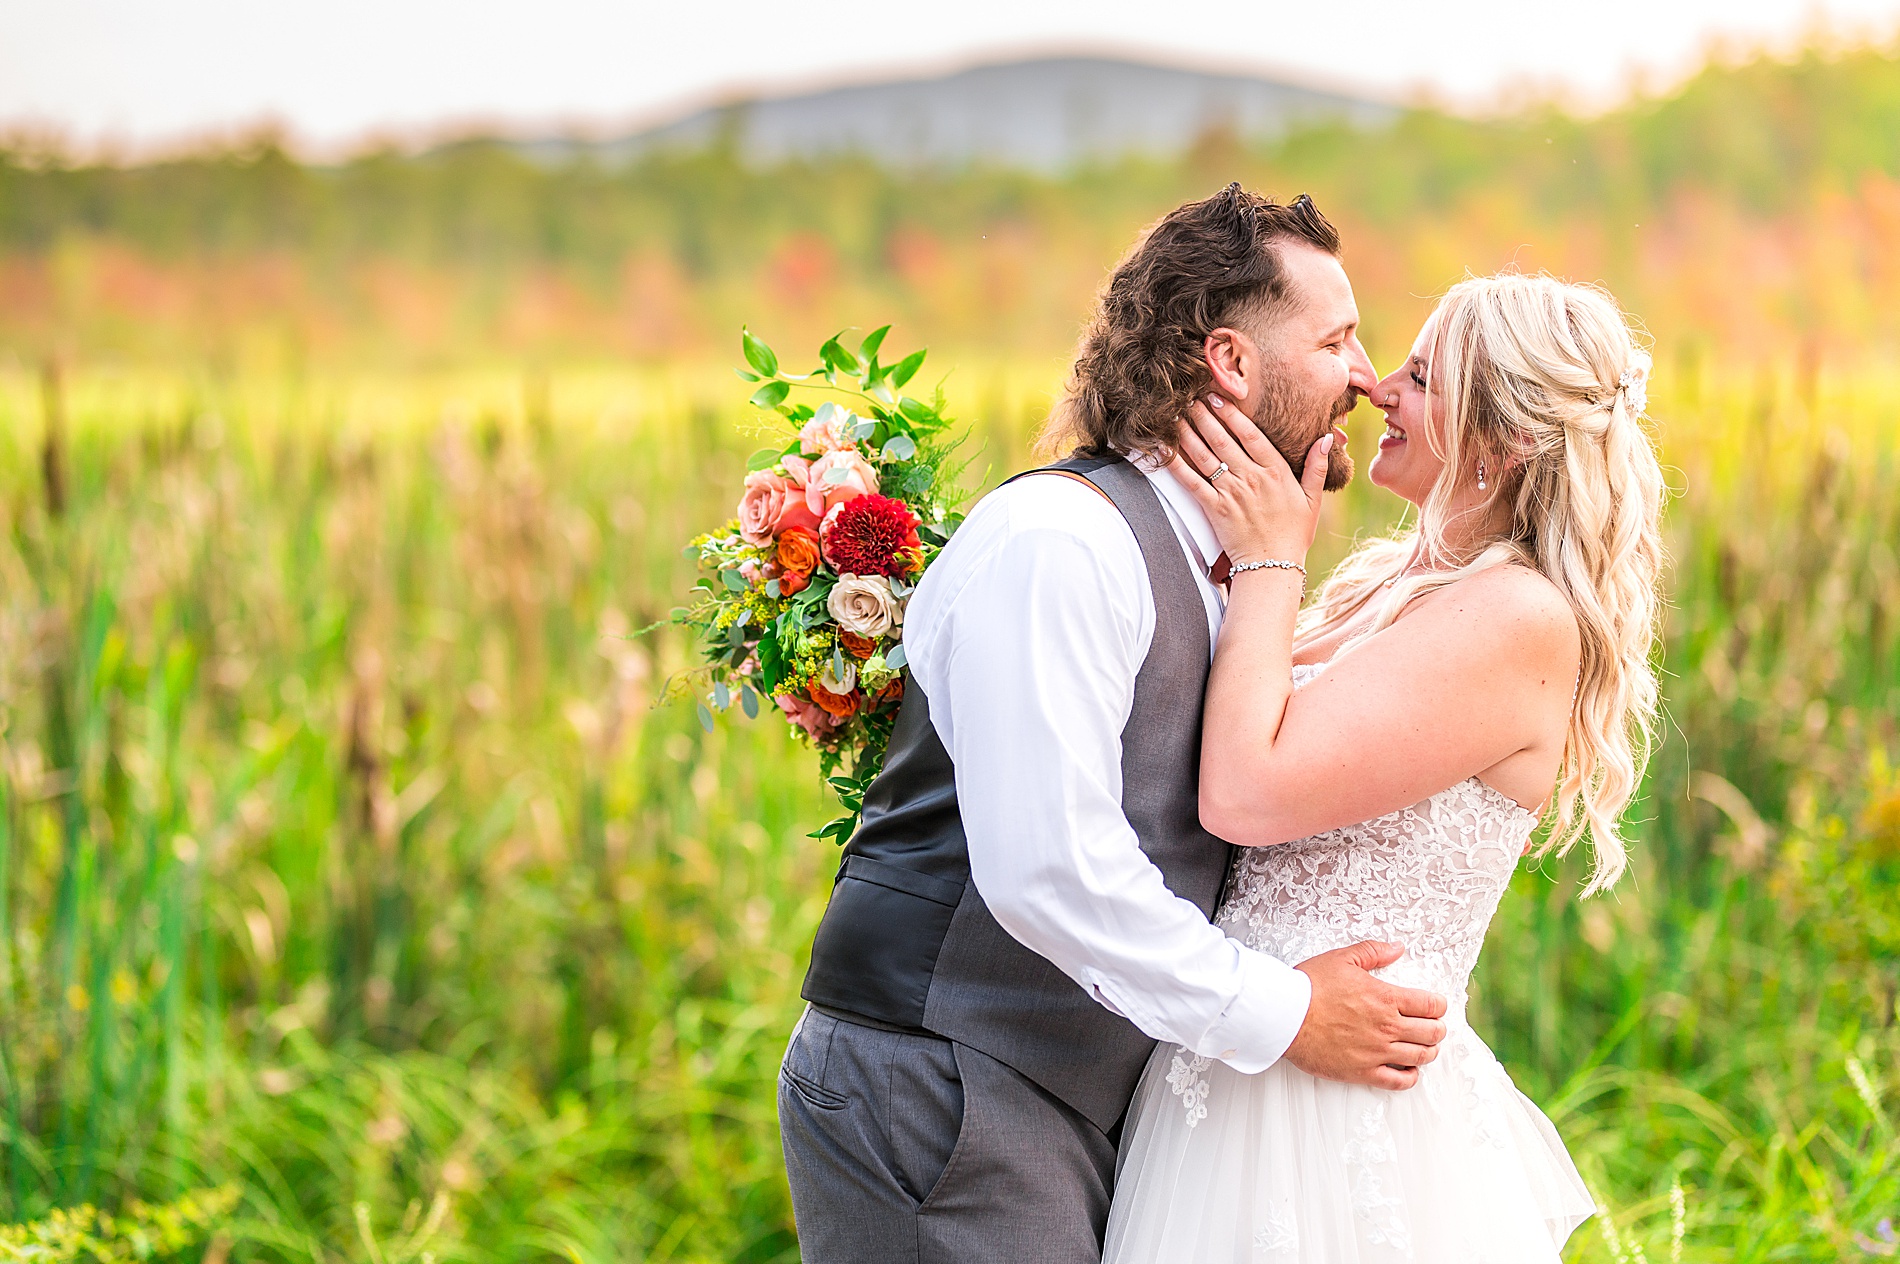 romantic golden hour newlywed portaits at Allrose Farm in New Hampshire